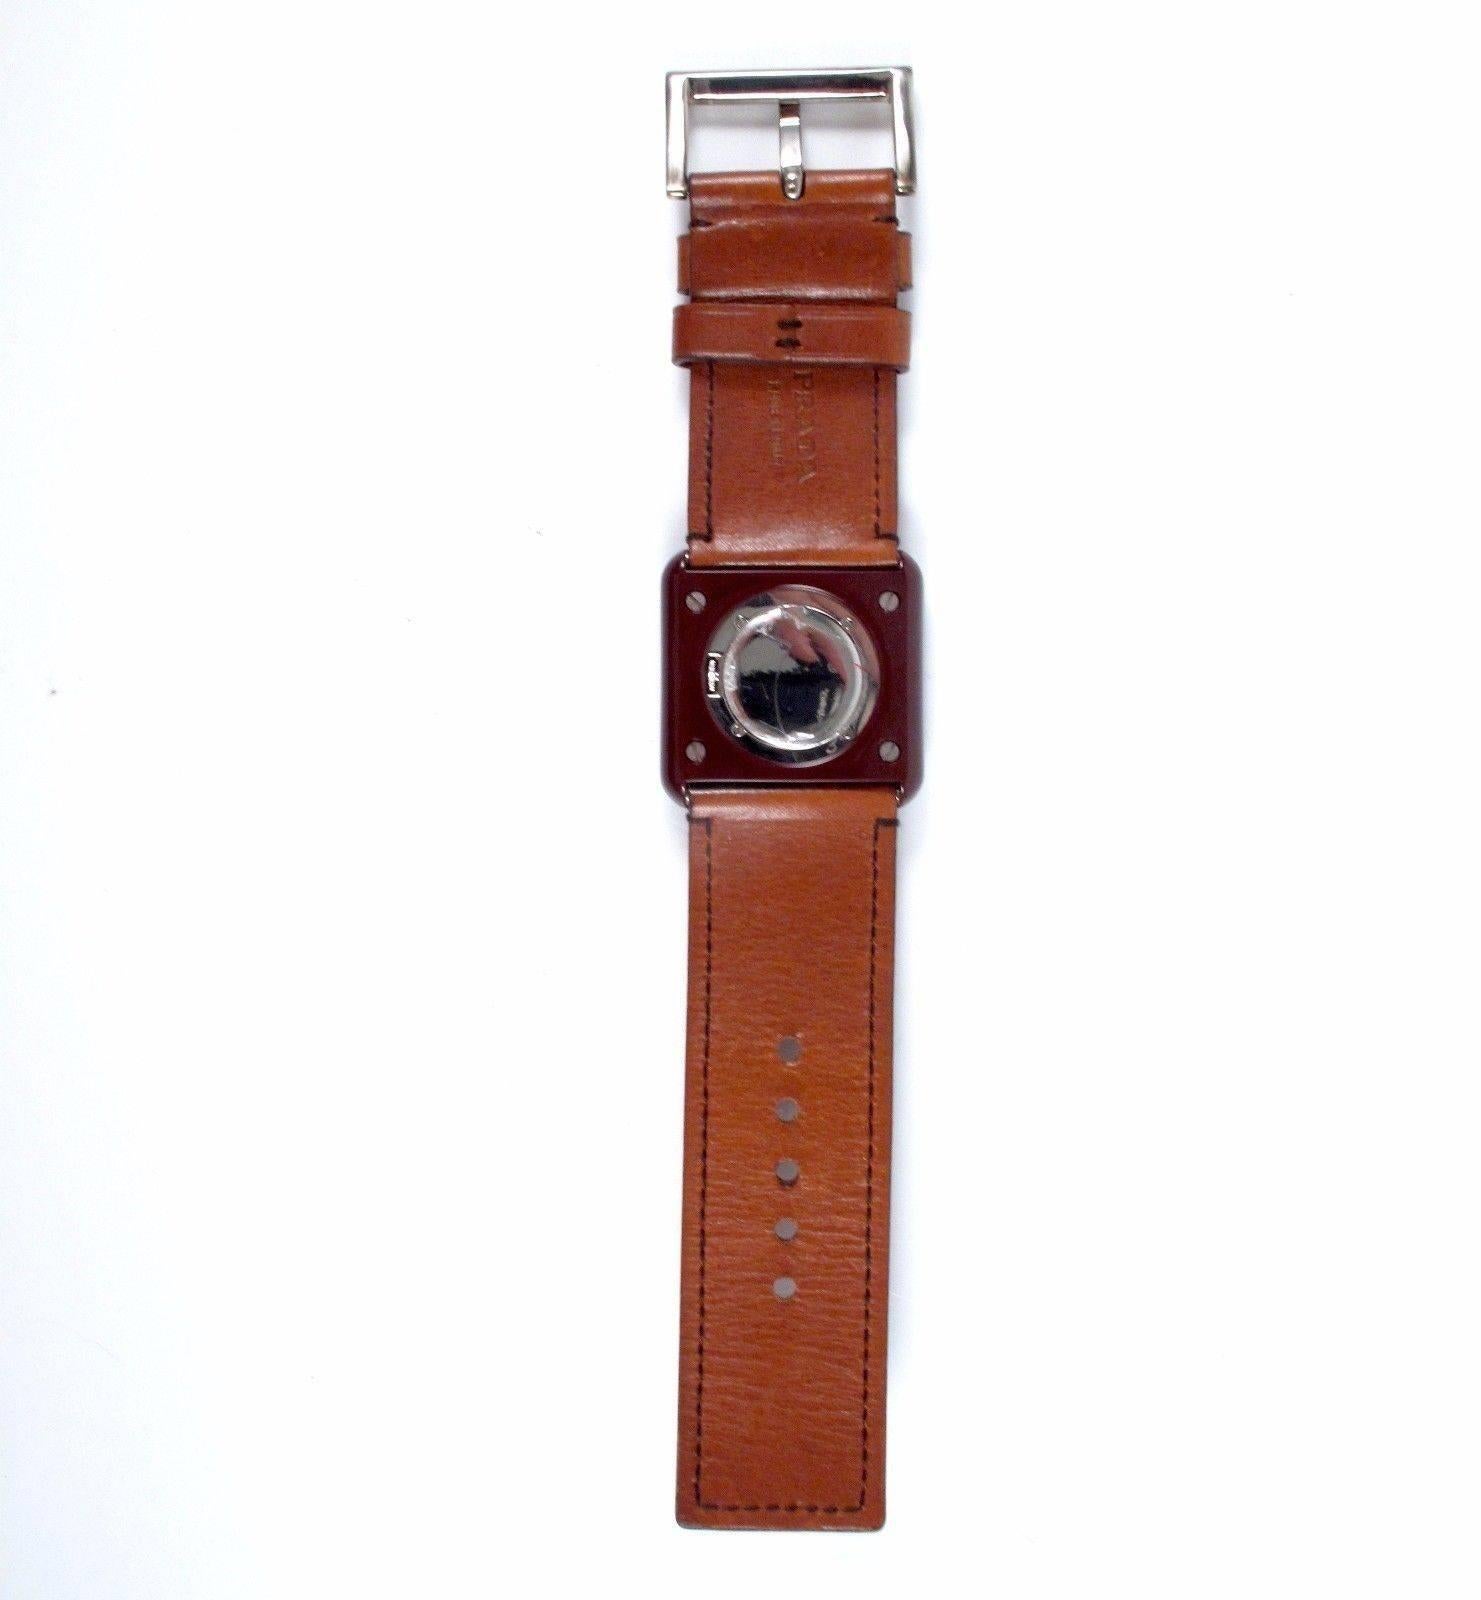 Color: Maroon / Black / Brown

Material: Resin / Leather

------------------------------------------------------------

Details:

- leather band

- two tone watch face

- roman numerals

- stainless steel buckle

- adjustable buckle